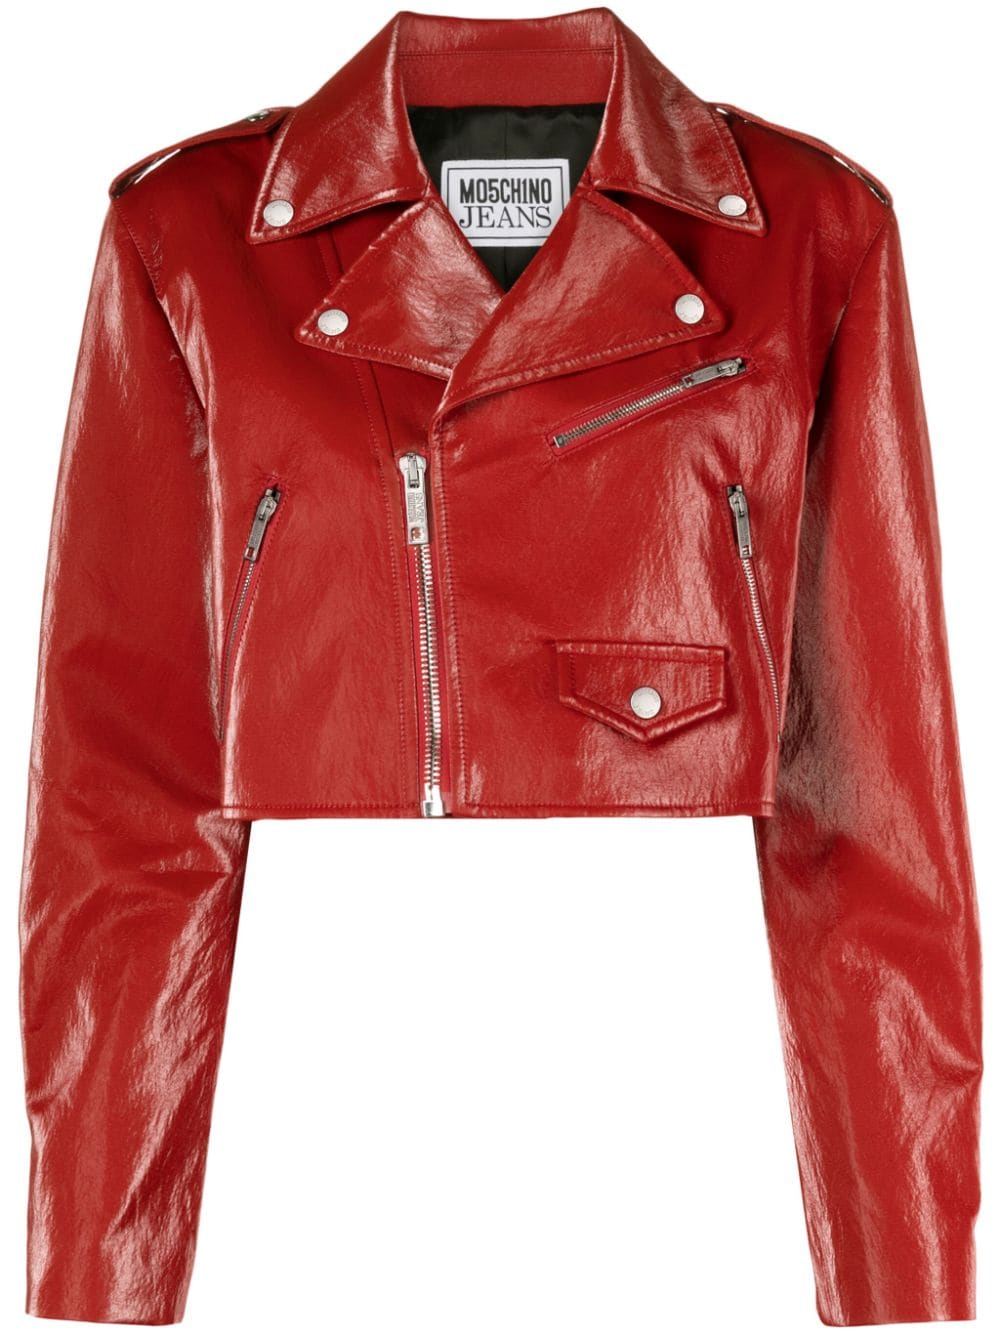 MOSCHINO JEANS coated cropped biker jacket - Red von MOSCHINO JEANS